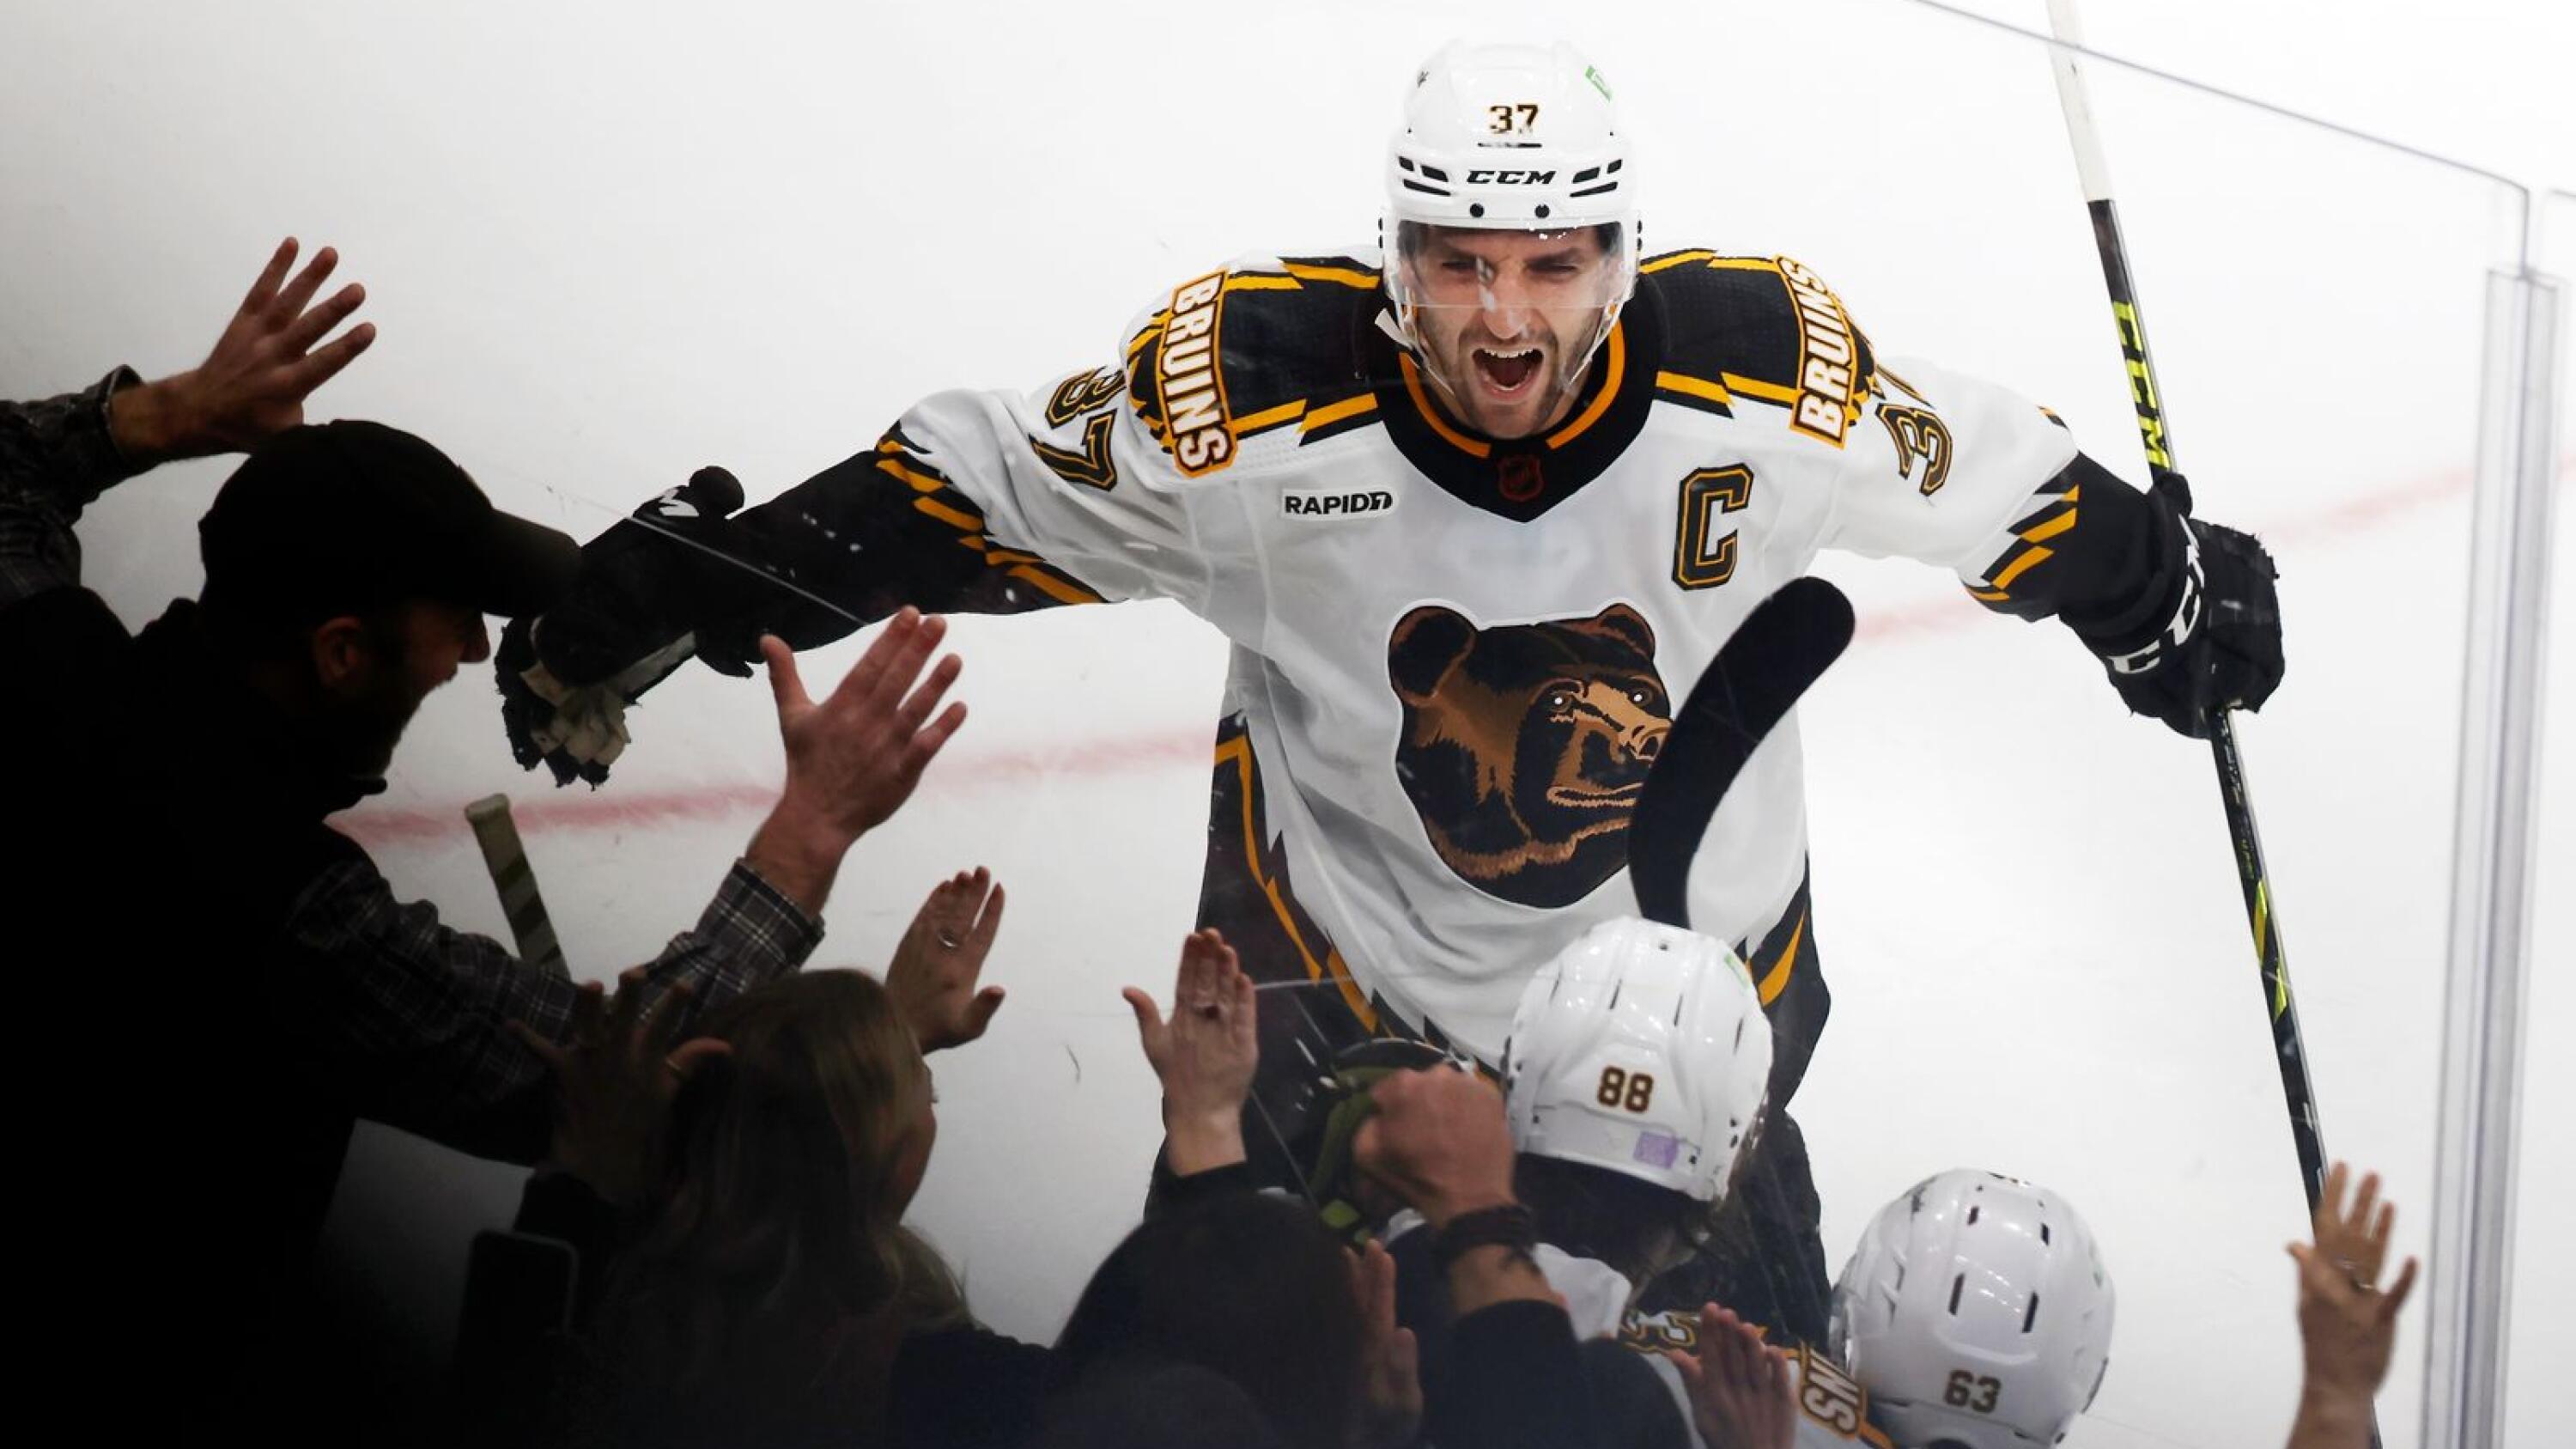 The Boston Bruins have broken the NHL single-season wins and points  records. Here's how they did it